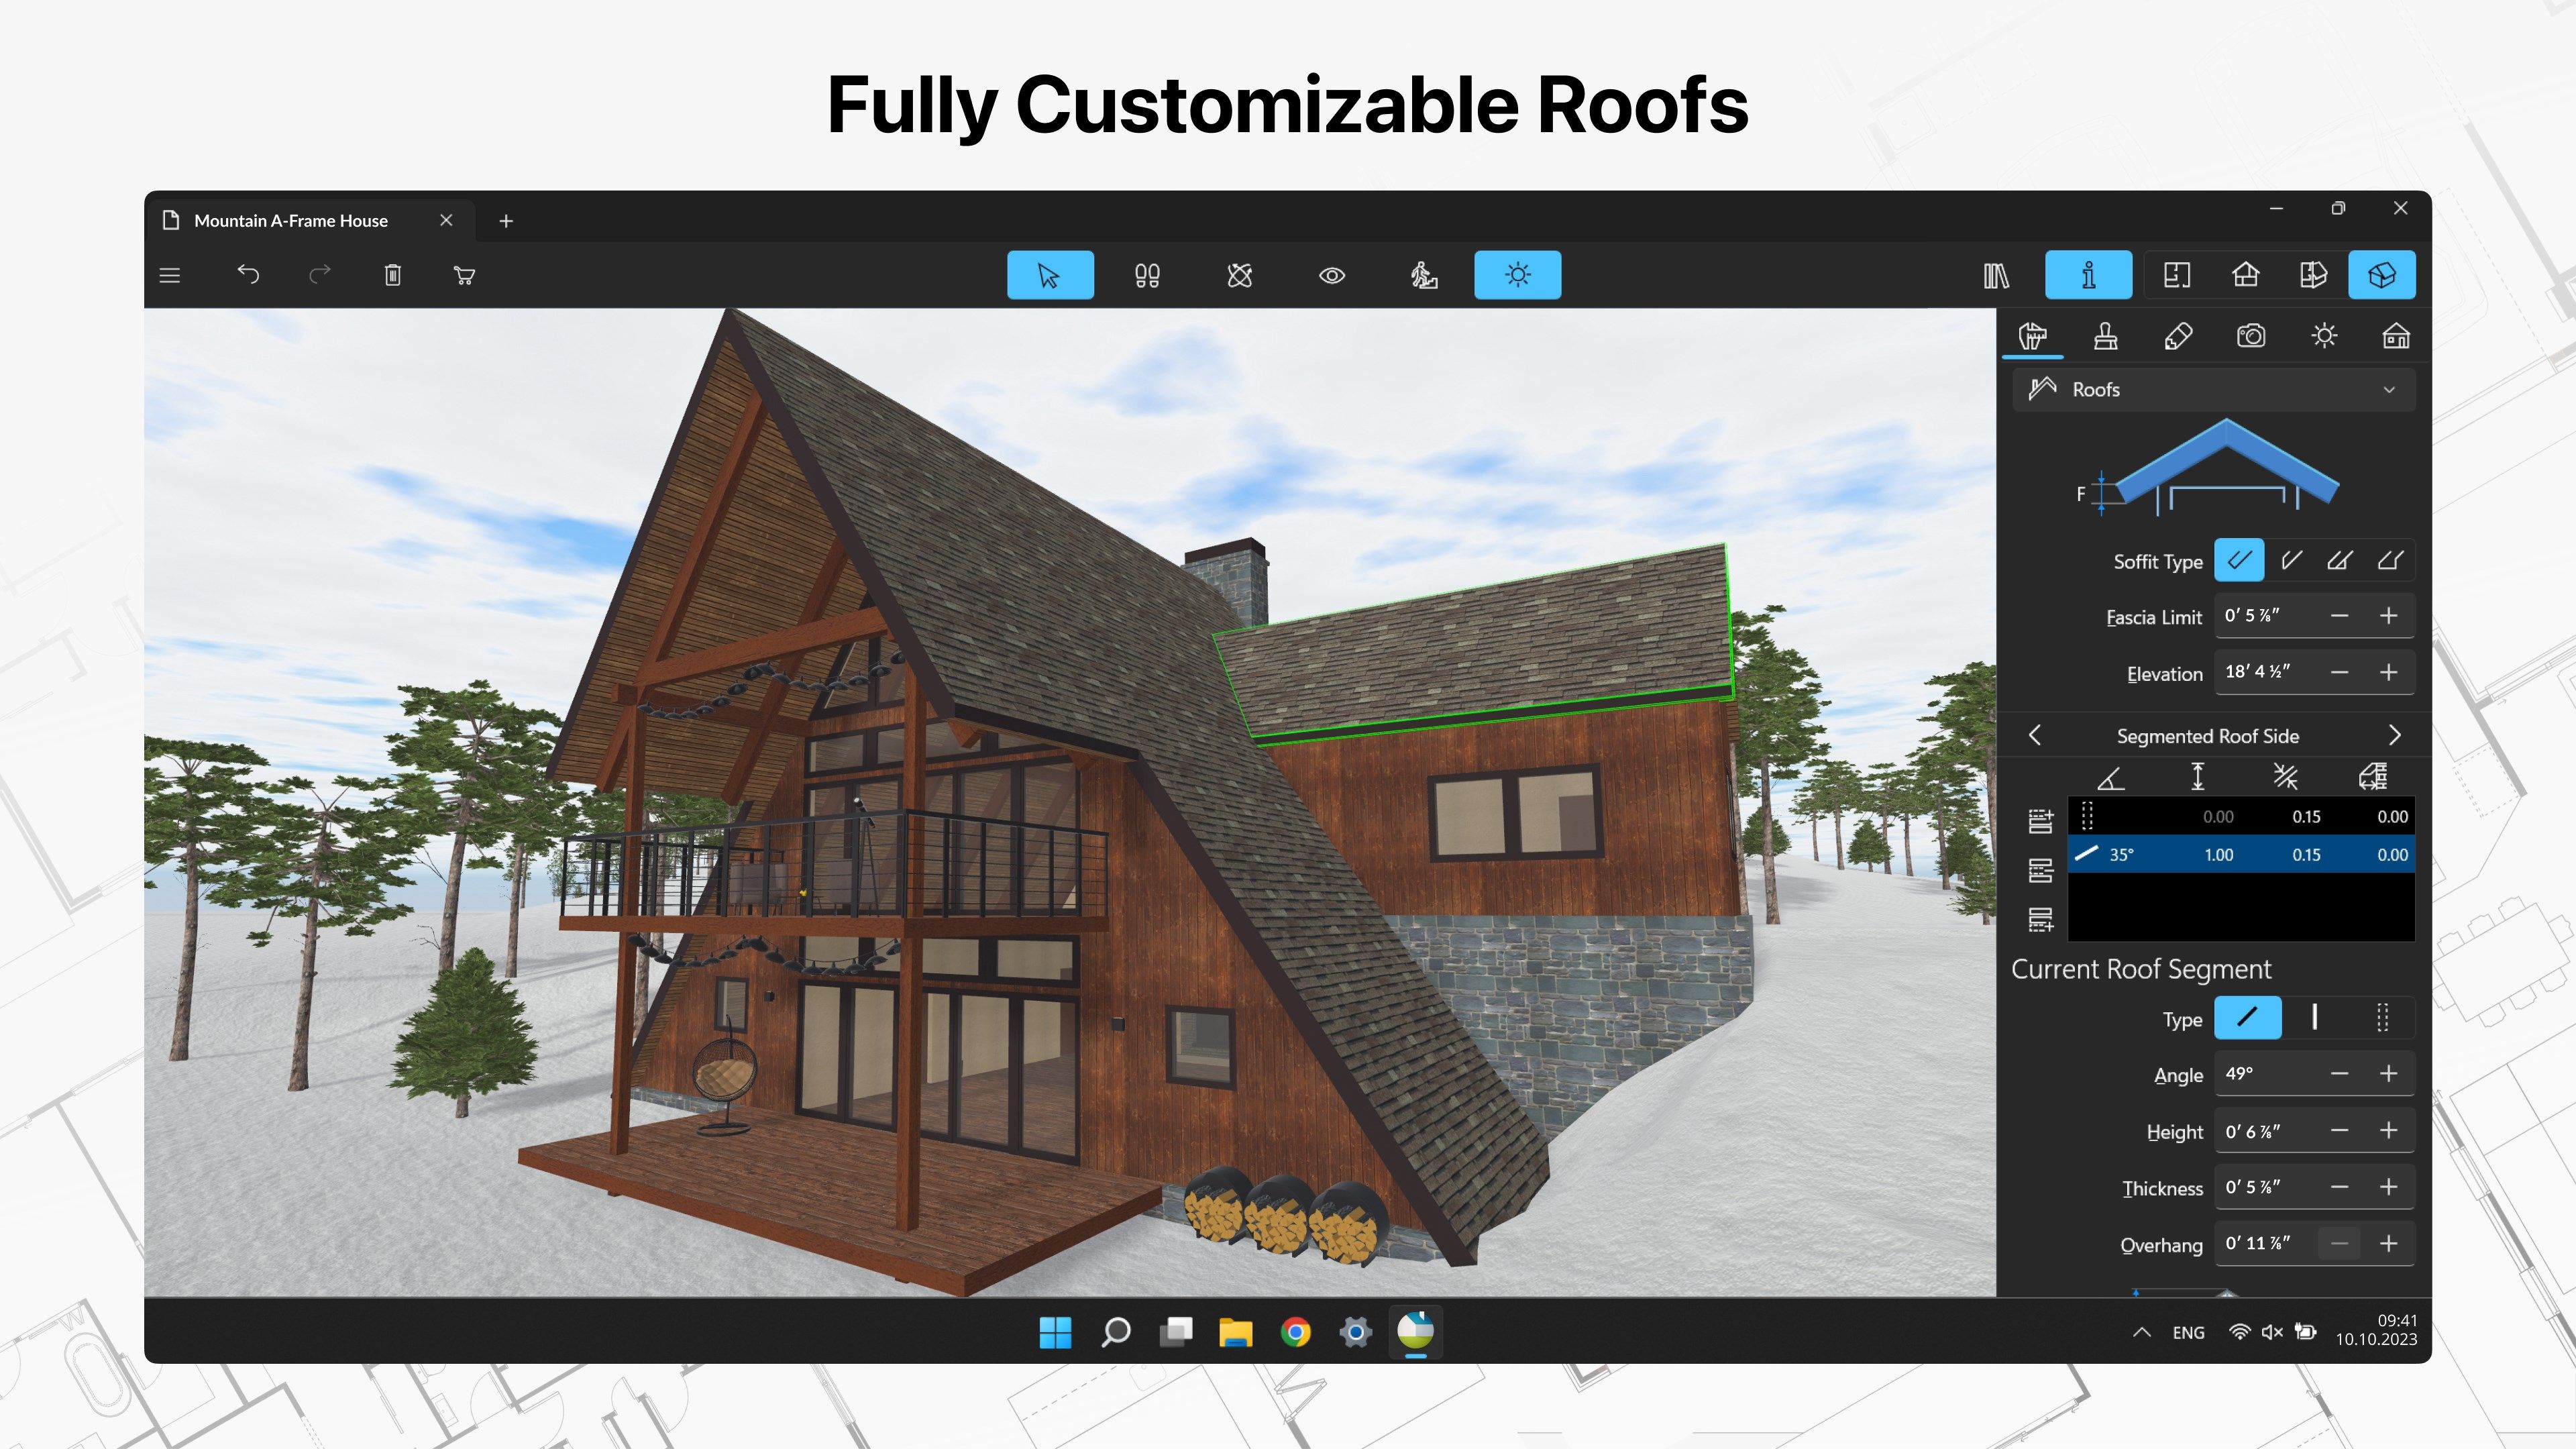 Fully Customizable Roofs